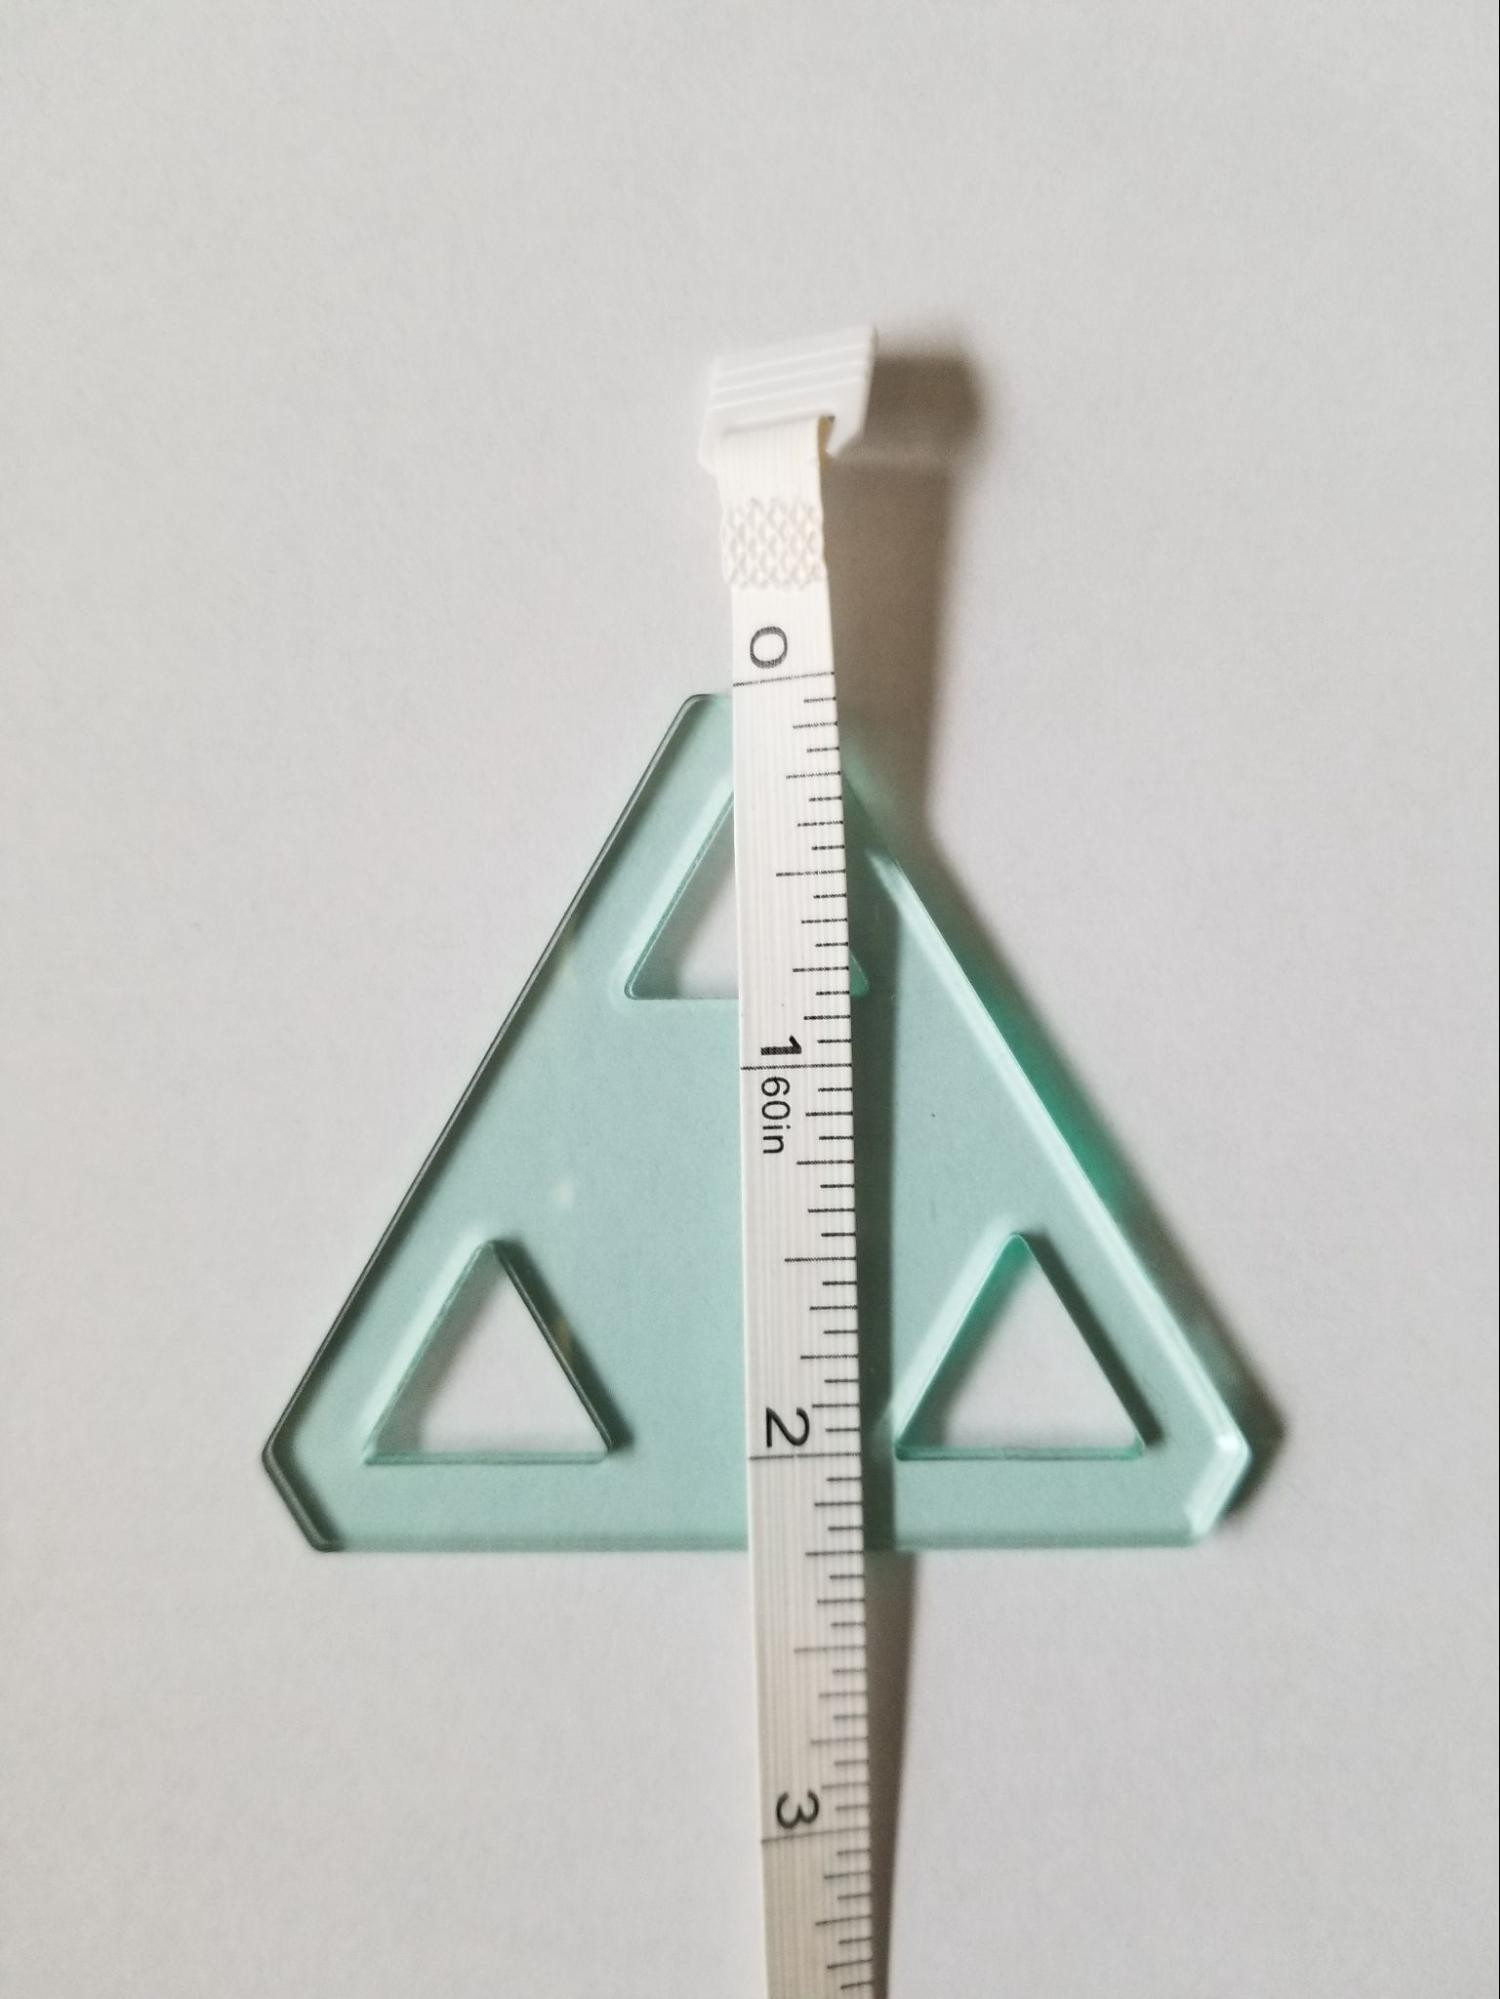 Measuring from point to base of a 60 degree triangle quilt template.